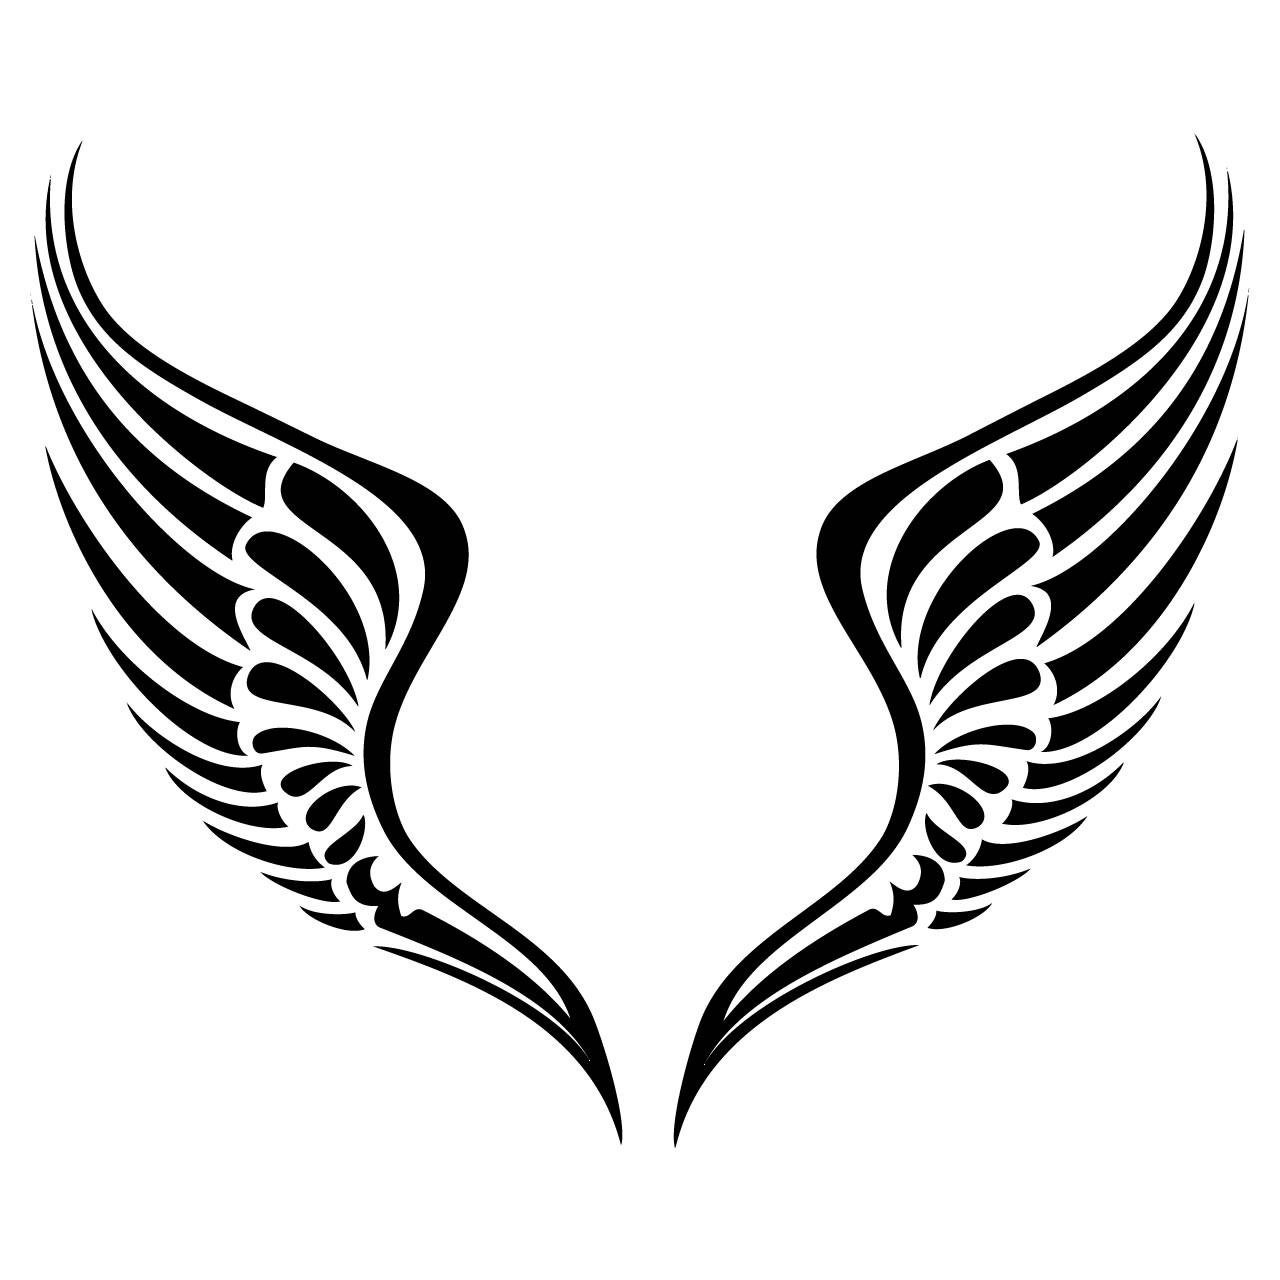 Halo angel wings clip art images illustrations photos